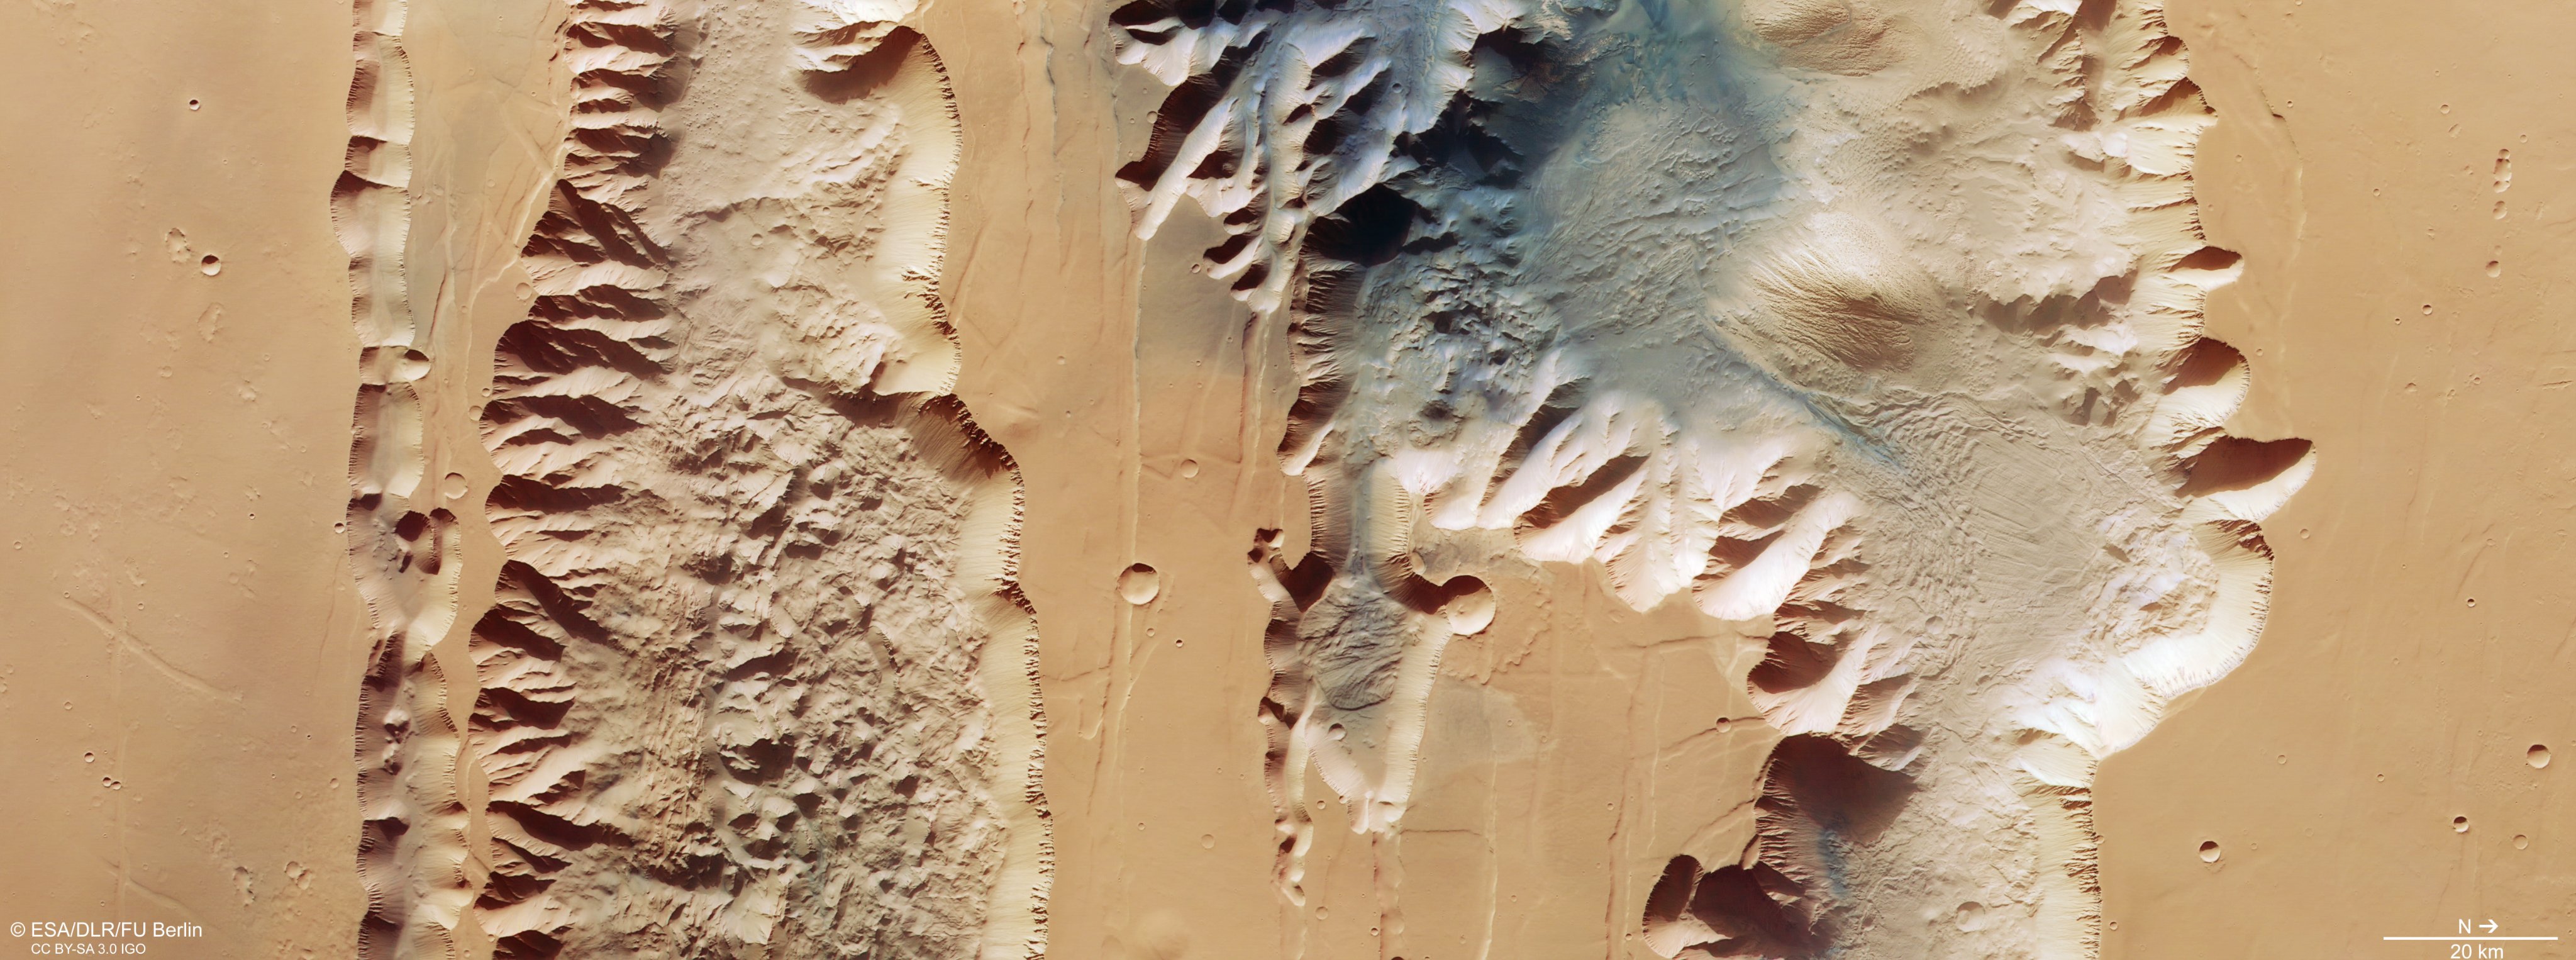 European spacecraft explores the Grand Canyon of Mars; check out these pics